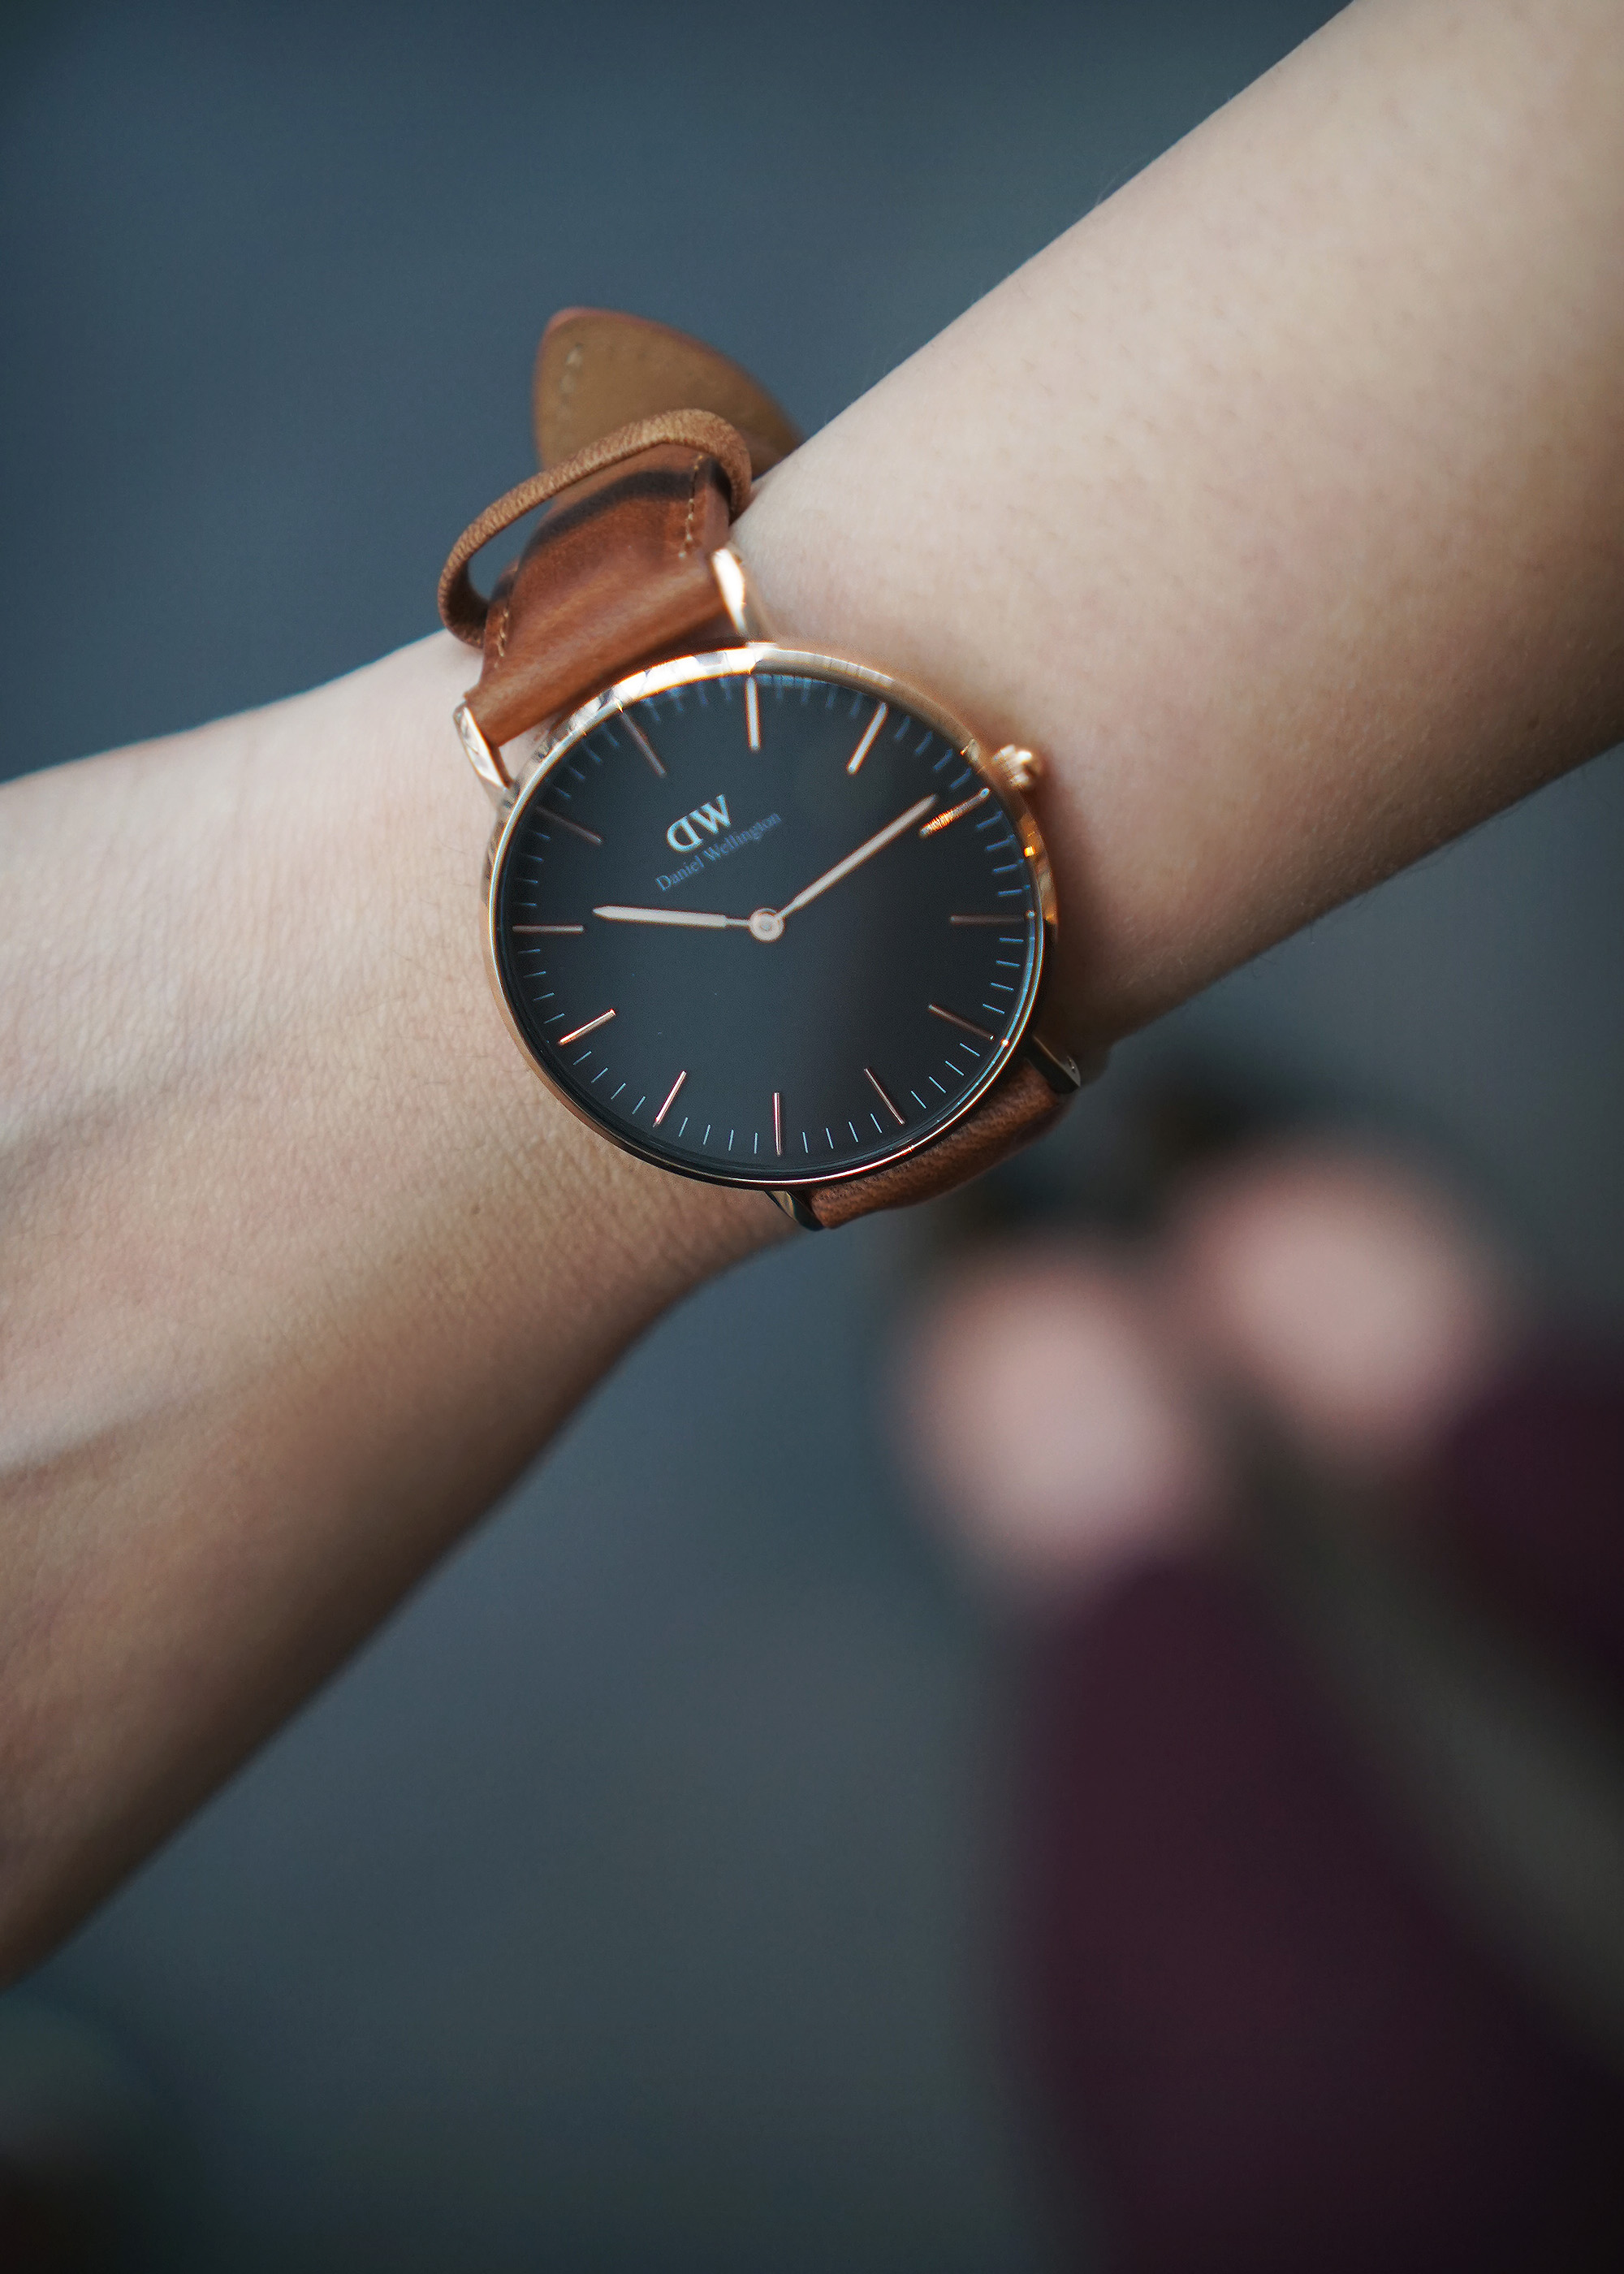 Skirt The Rules / The Best Watch for Work